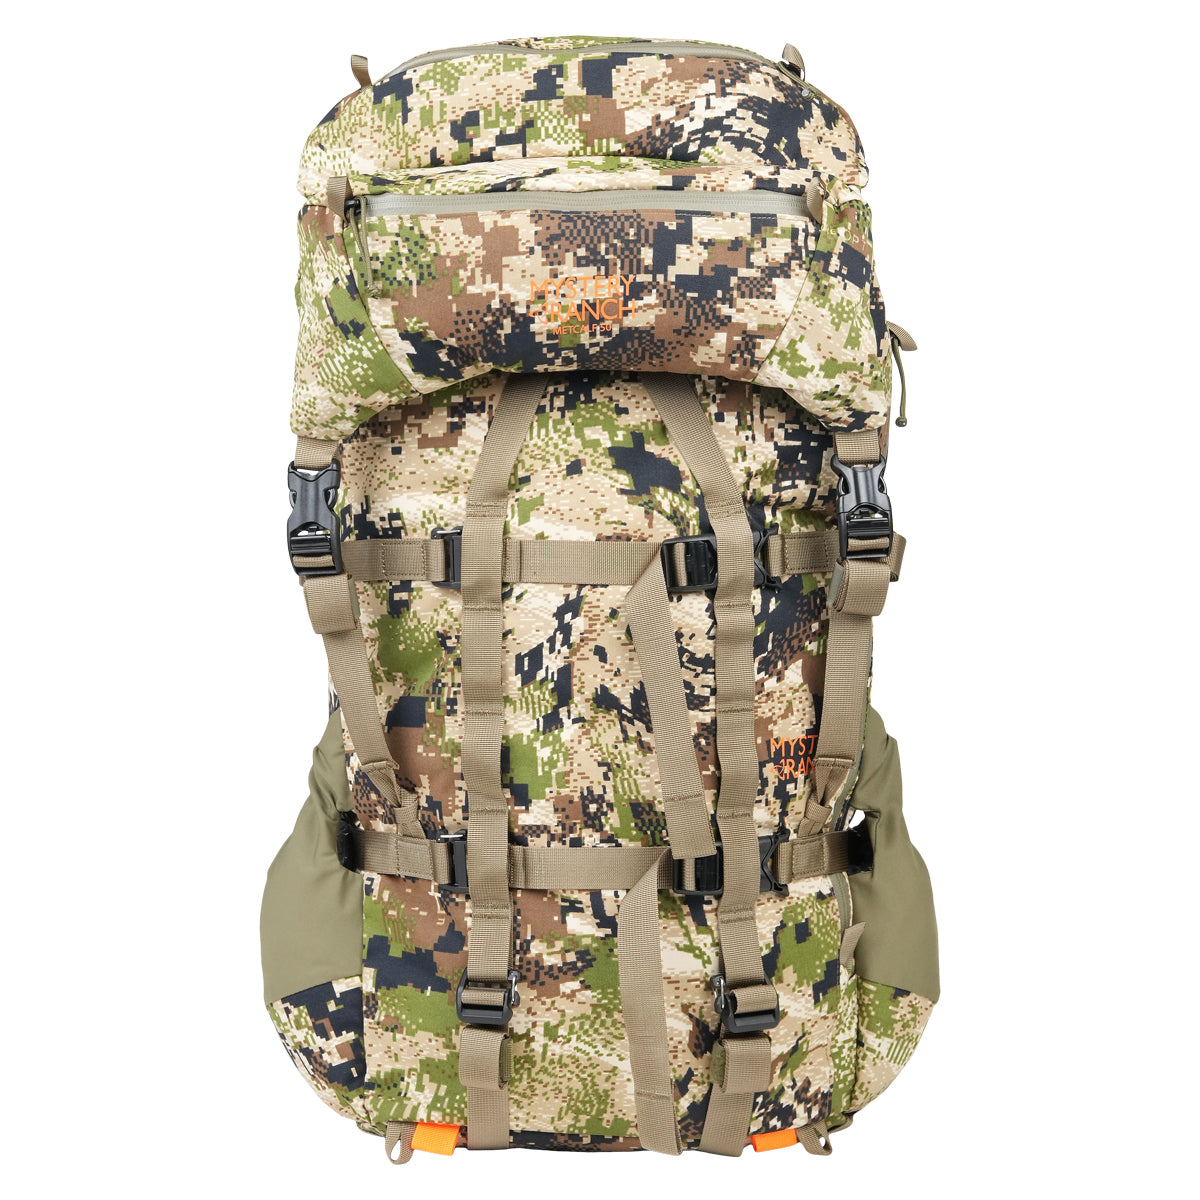 Mystery Ranch Metcalf 50 Backpack in Optifade Subalpine by GOHUNT | Mystery Ranch - GOHUNT Shop